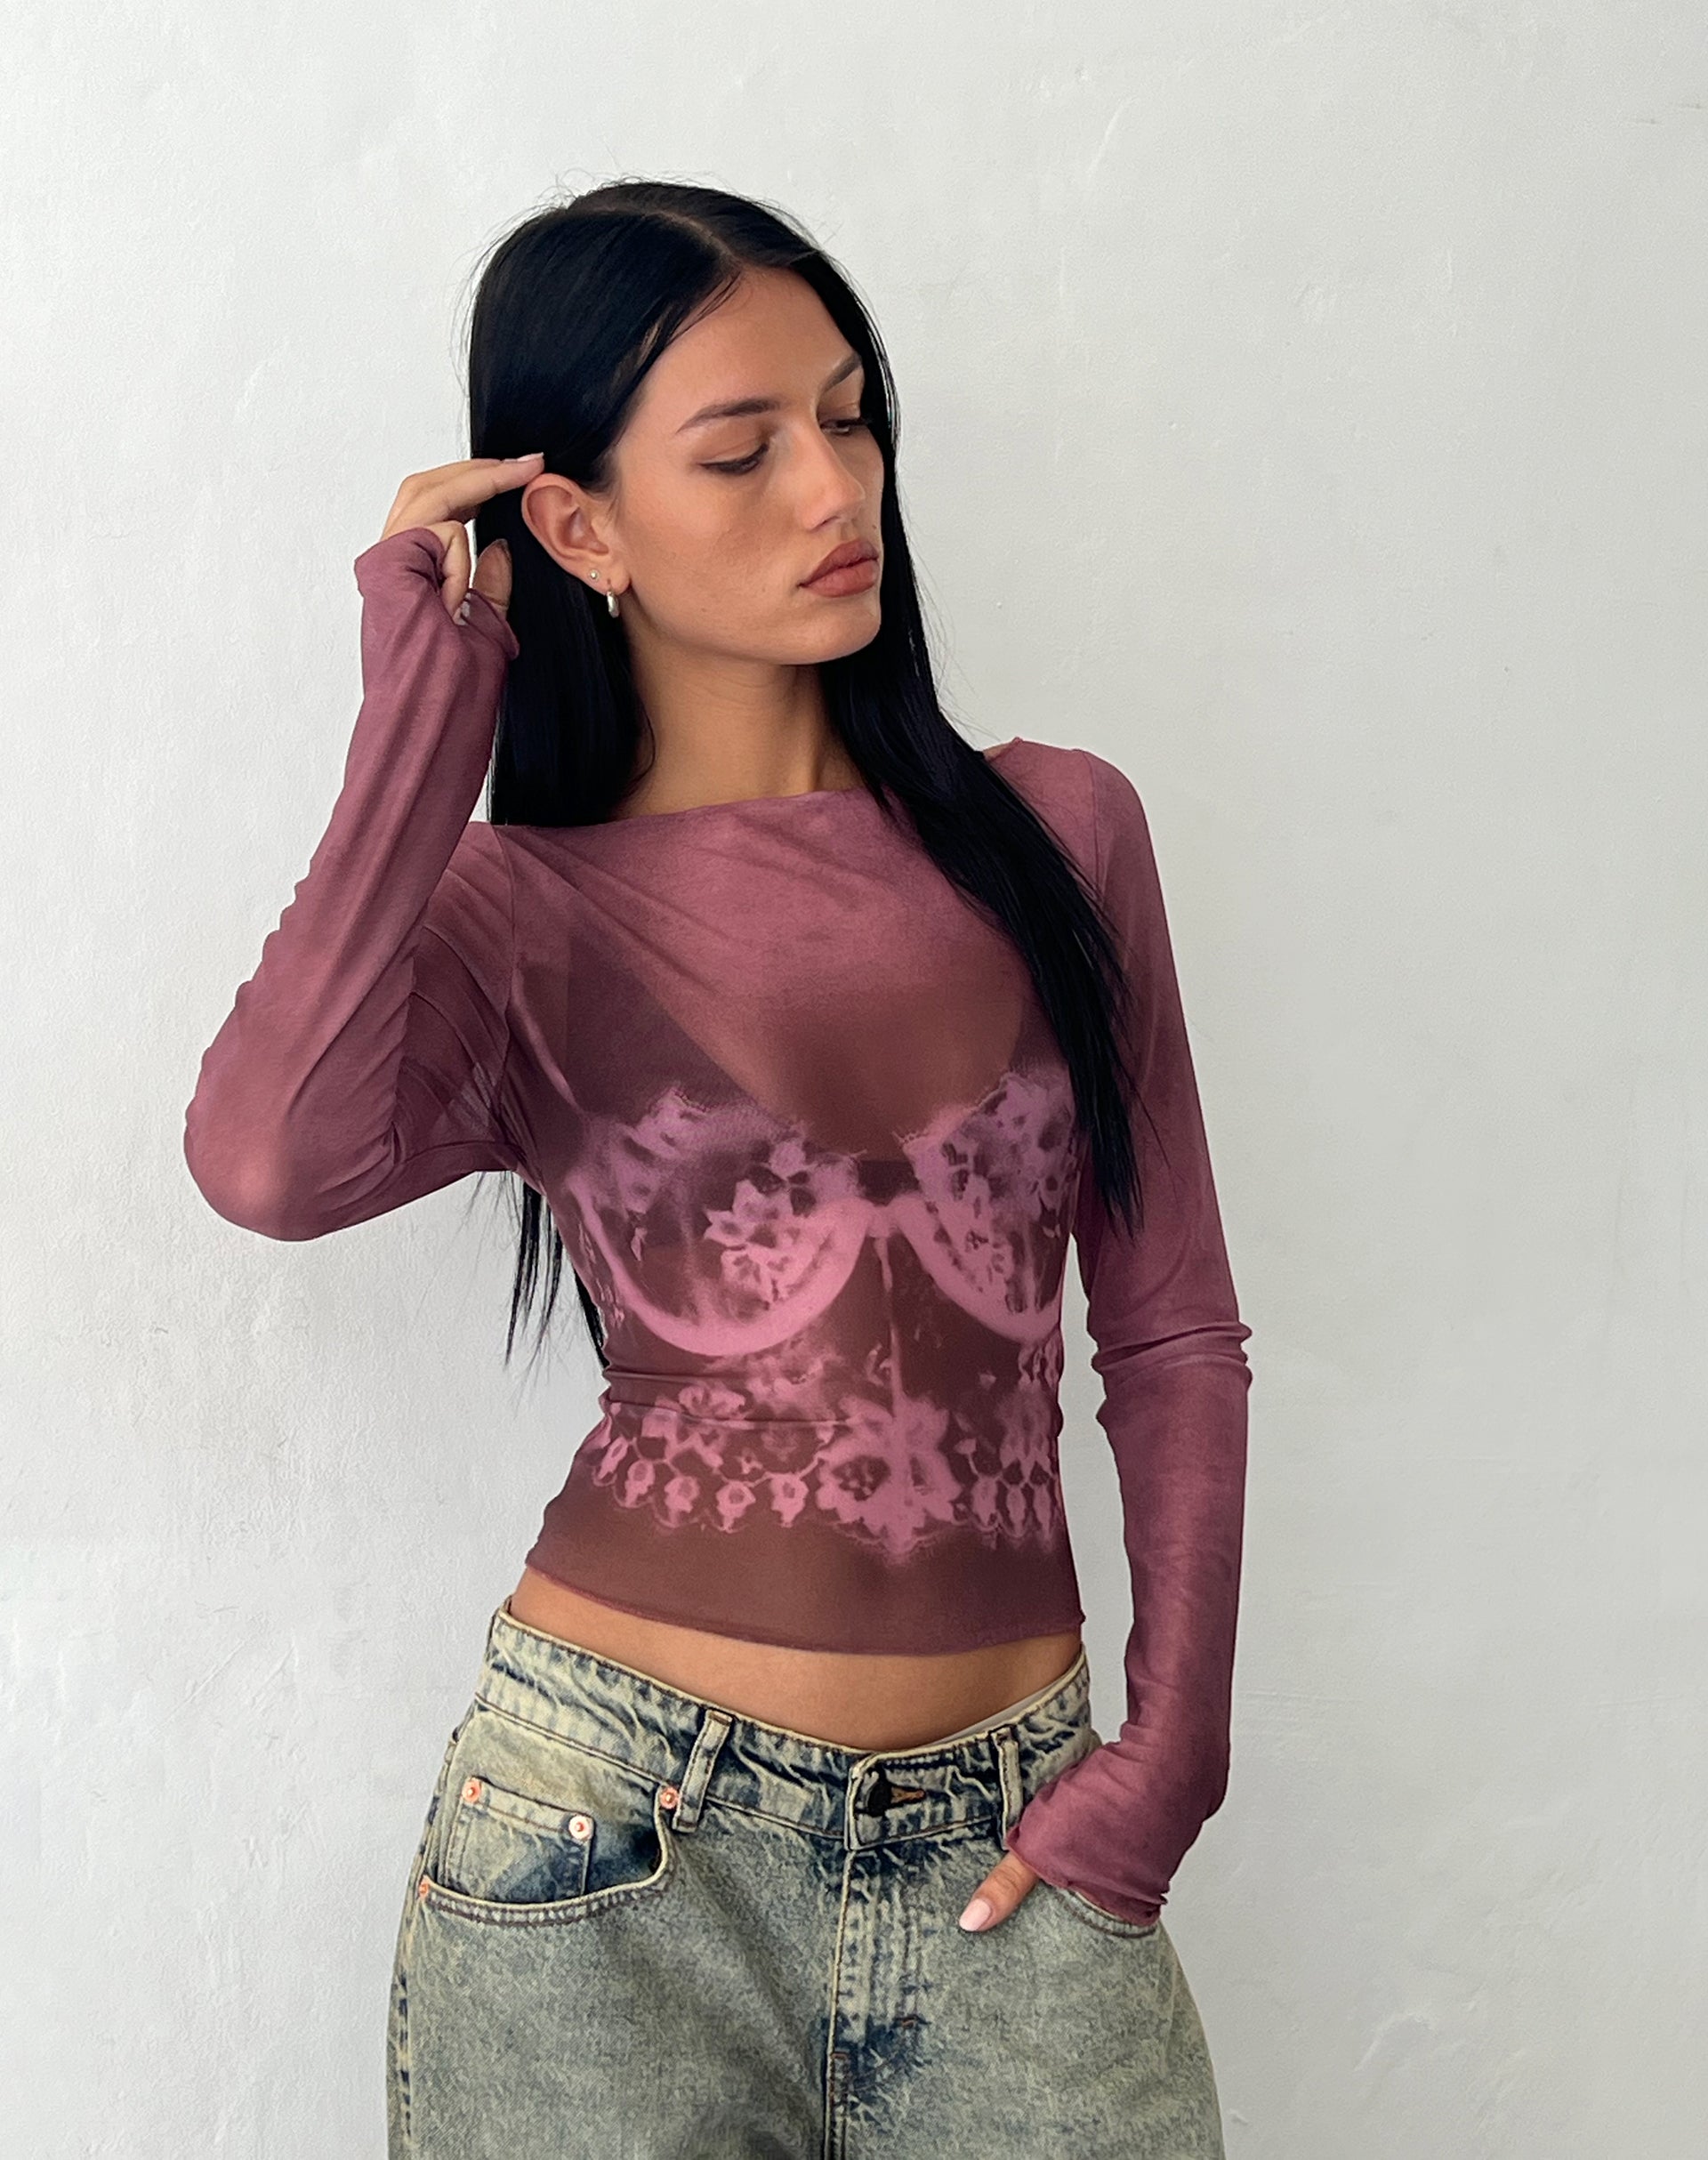 Image of Armali Long Sleeve Top in Burgundy with Lace Bra Scan